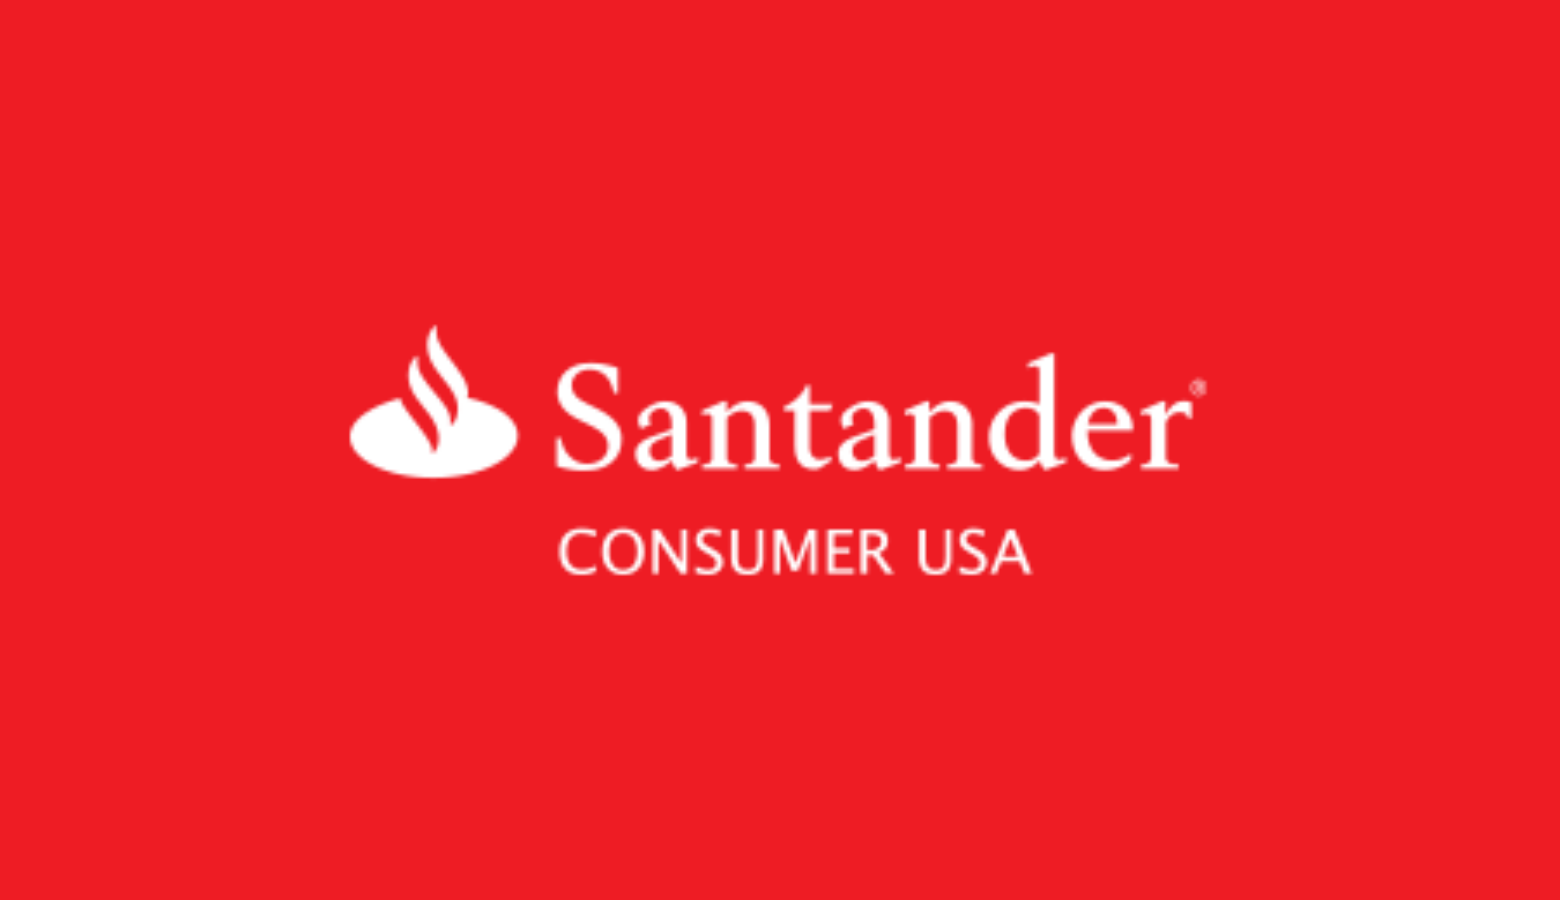 Thirty-three states, including Indiana, investigated Santander Consumer USA, the country’s largest subprime auto financing company. (Courtesy of Santander Consumer USA)